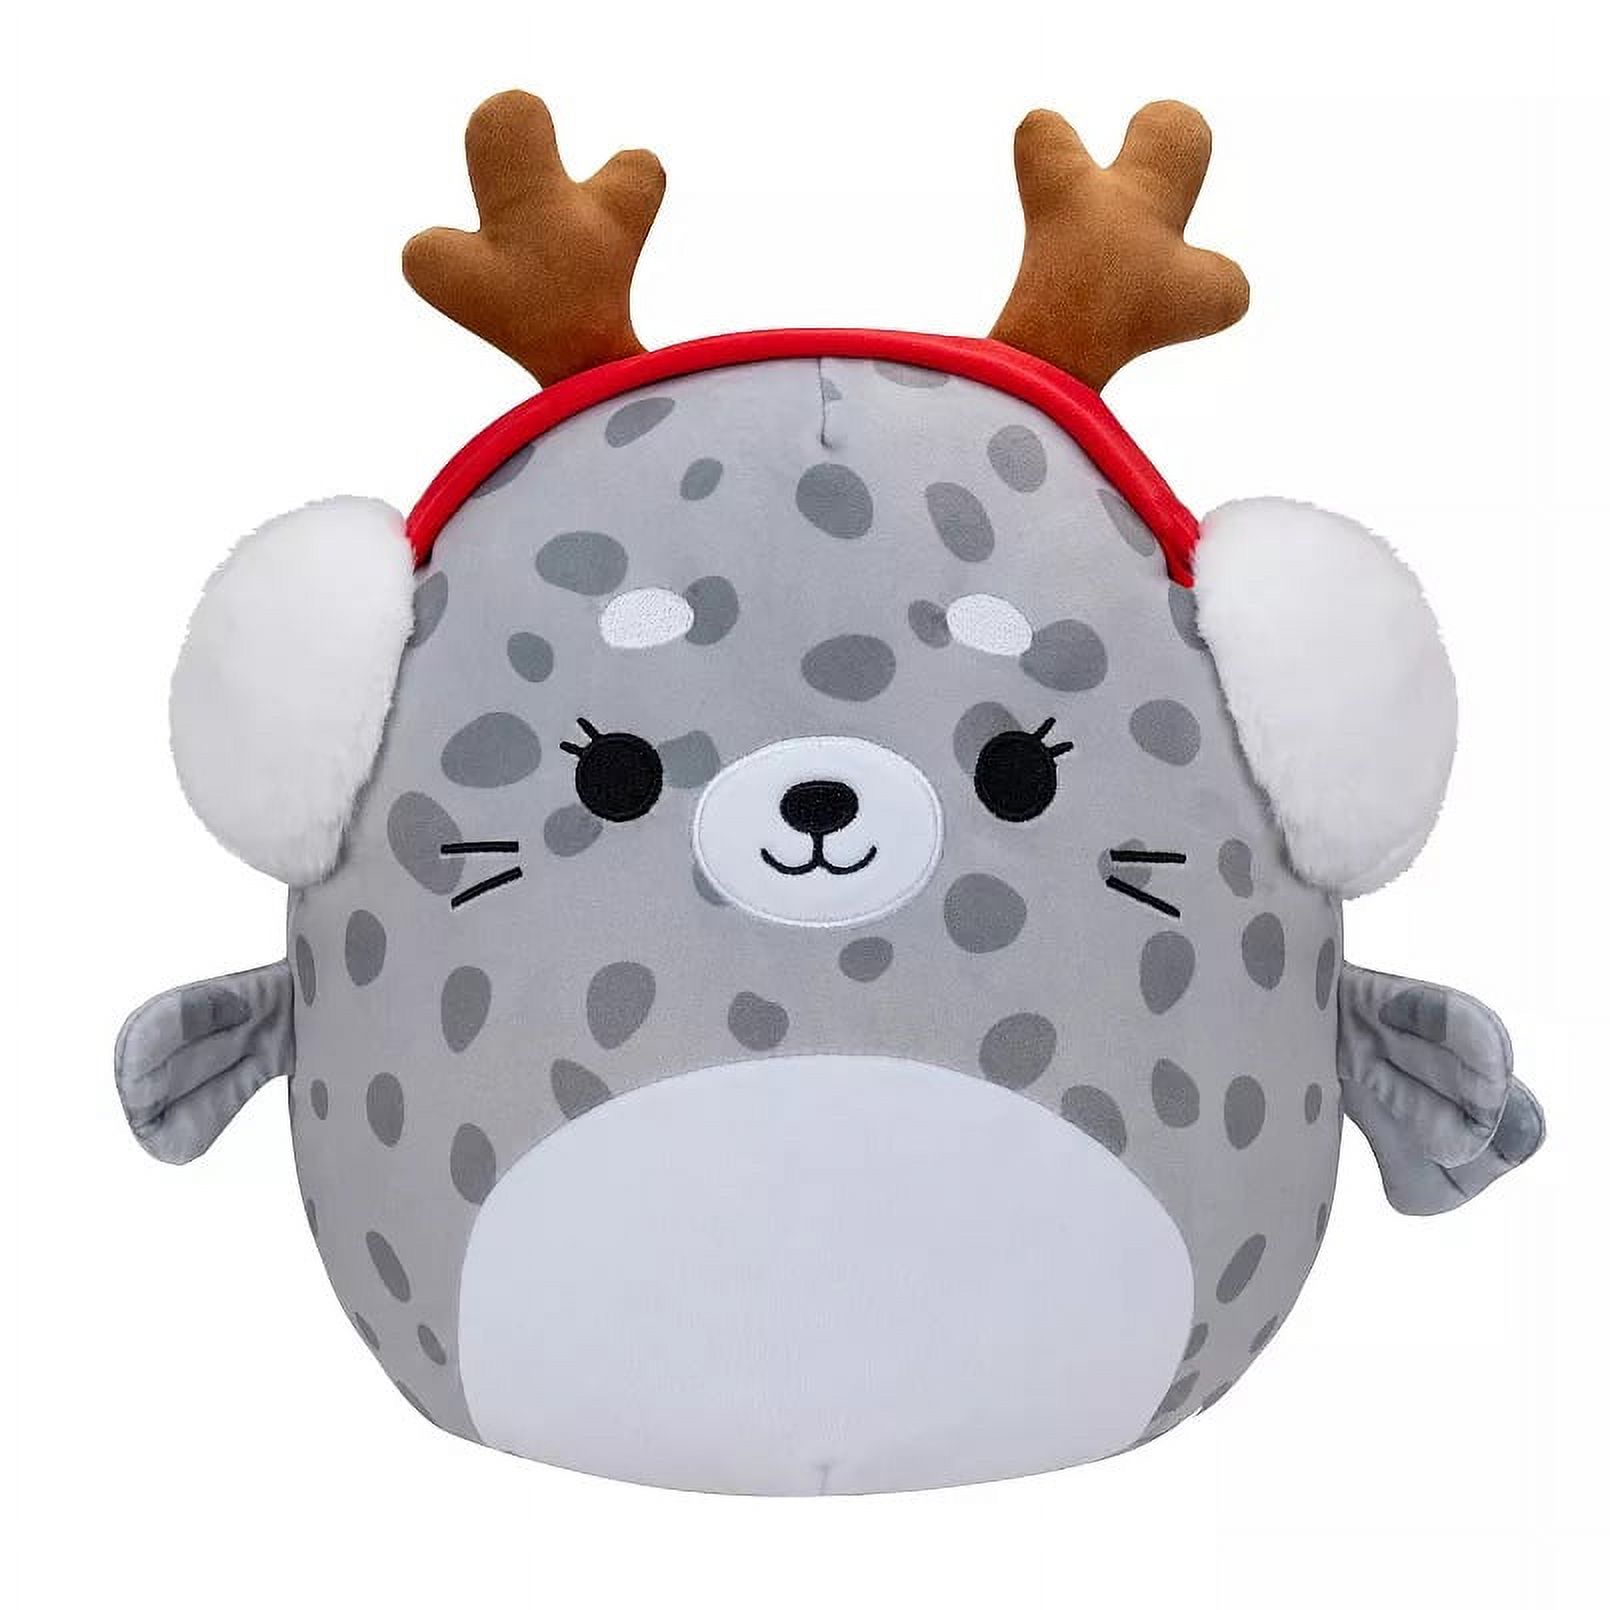 Squishmallows 10" Seal - Odile, The Stuffed Animal Plush Toy - image 1 of 2